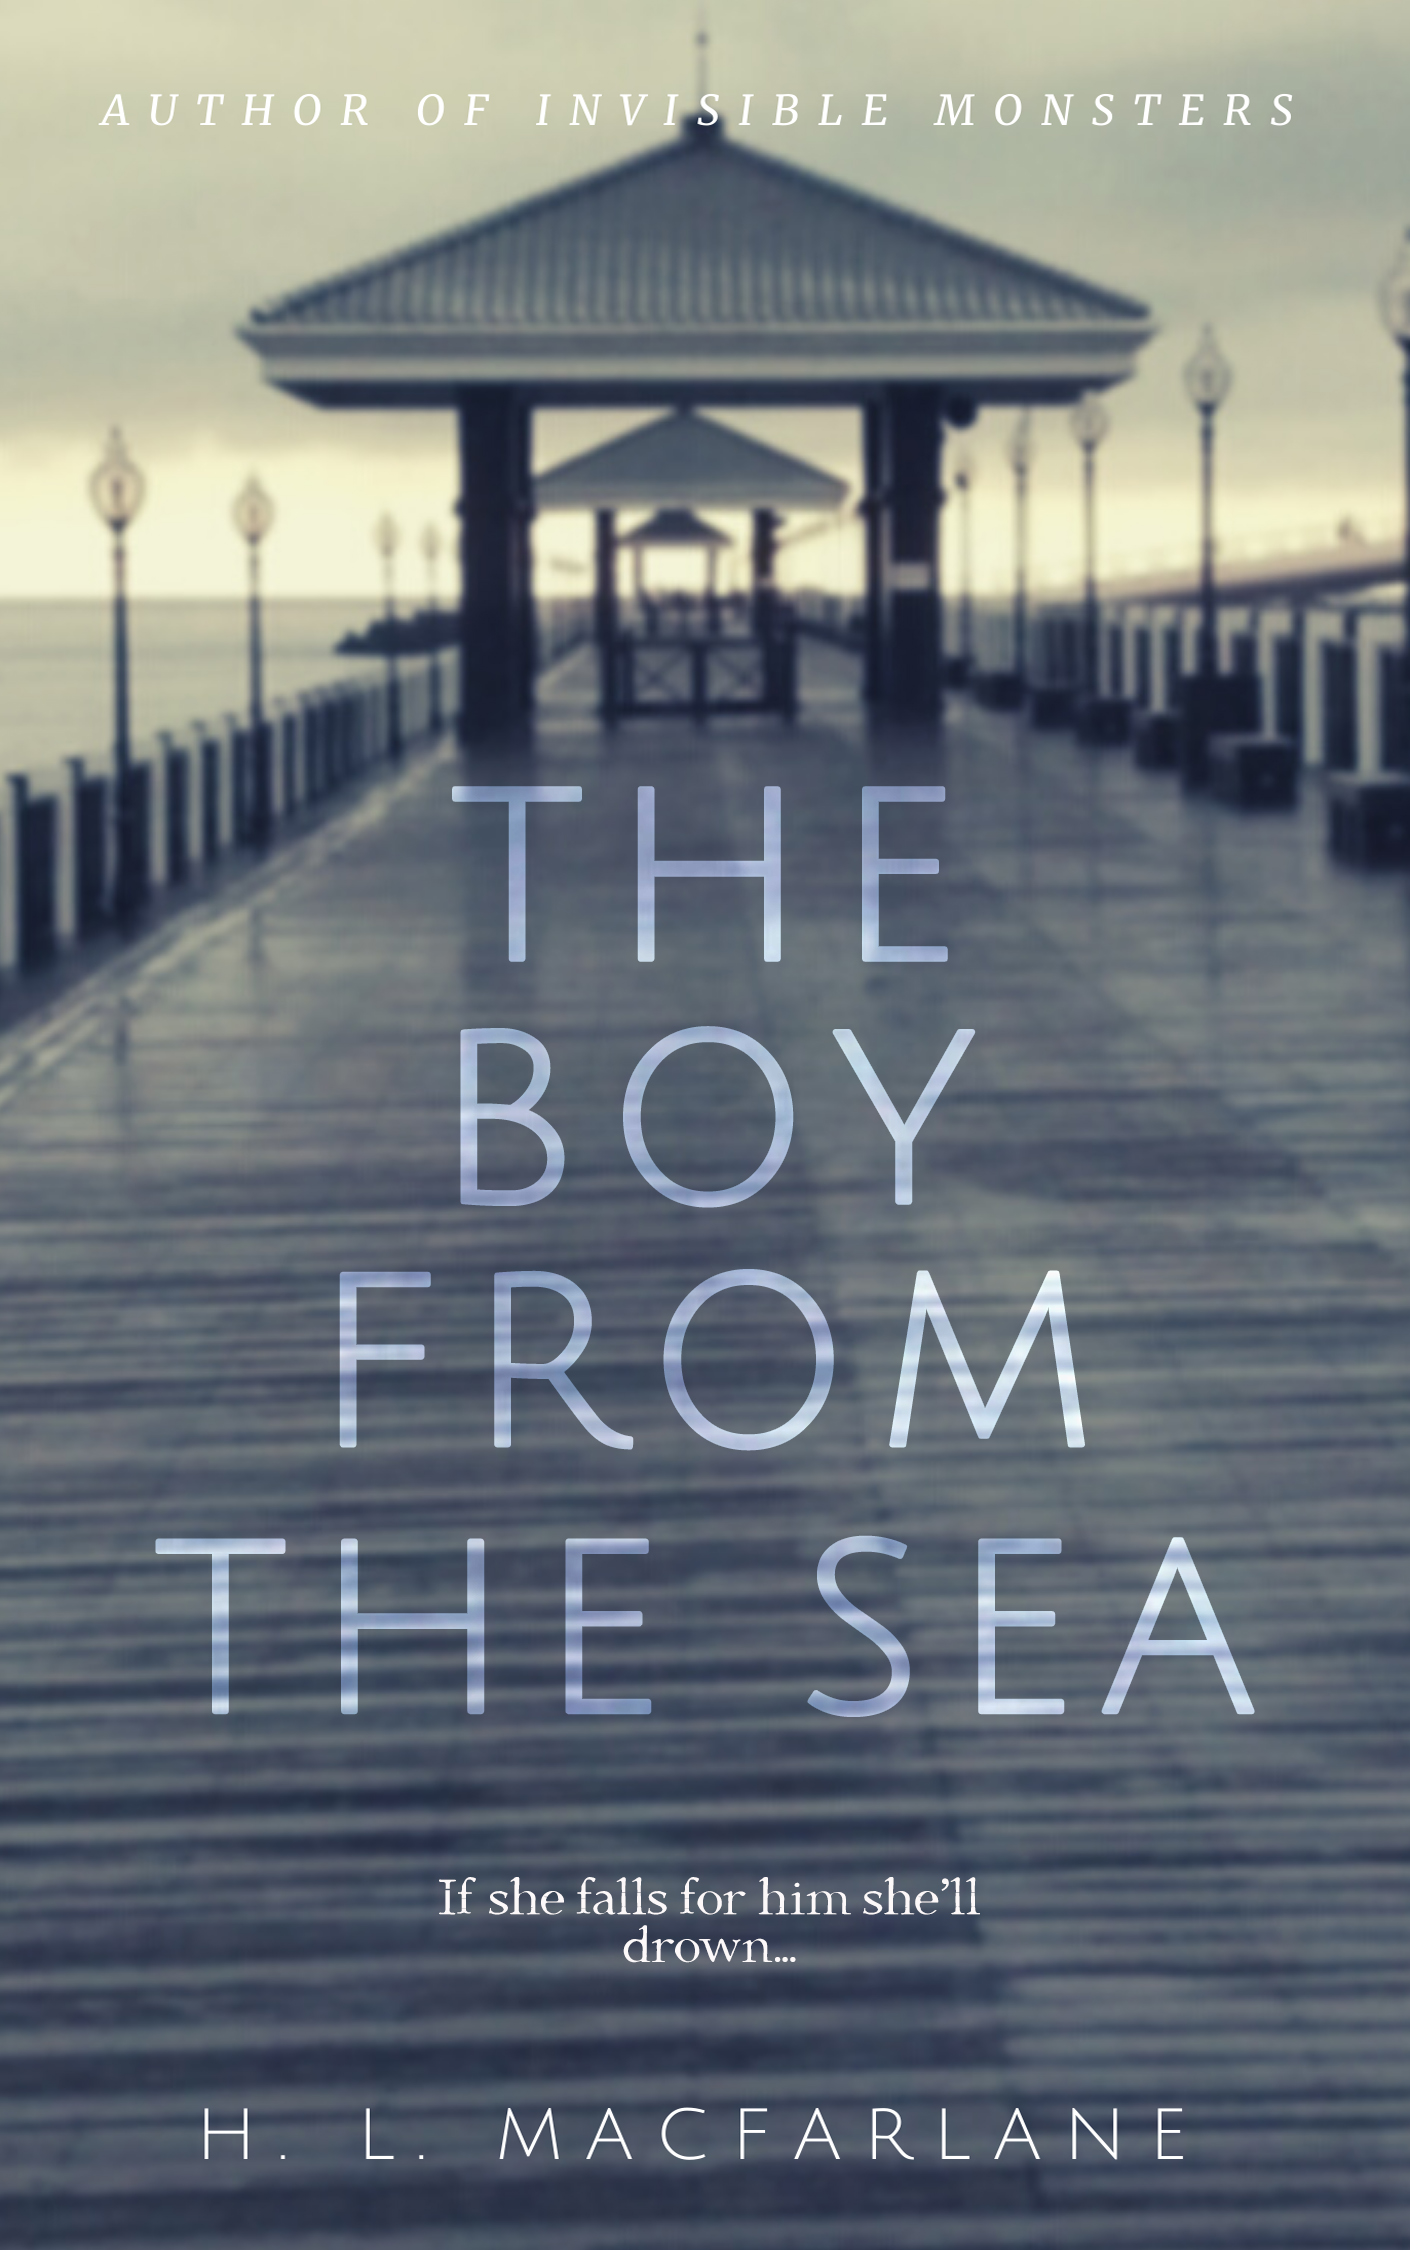 The title 'The Boy from the Sea' is written in capital letter, sans serif font in transluscent white letters across a faded, wet blue pier with pale yellow clouds. 